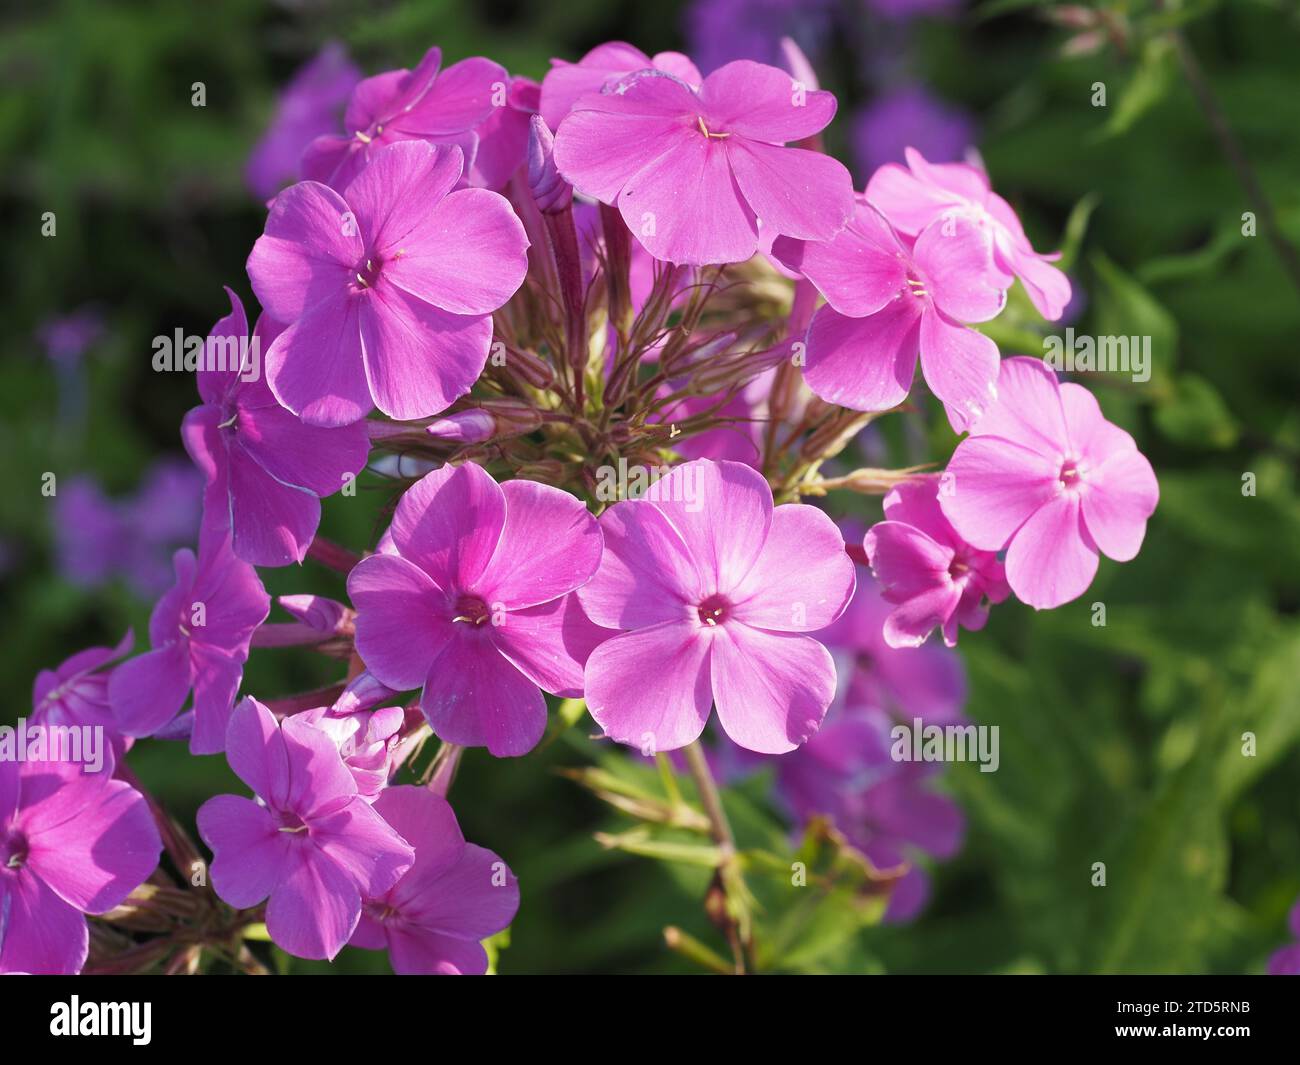 Garden Phlox Scientific name: Polemoniaceae Higher classification: Heathers and allies Kingdom: Plantae Order: Ericales Stock Photo